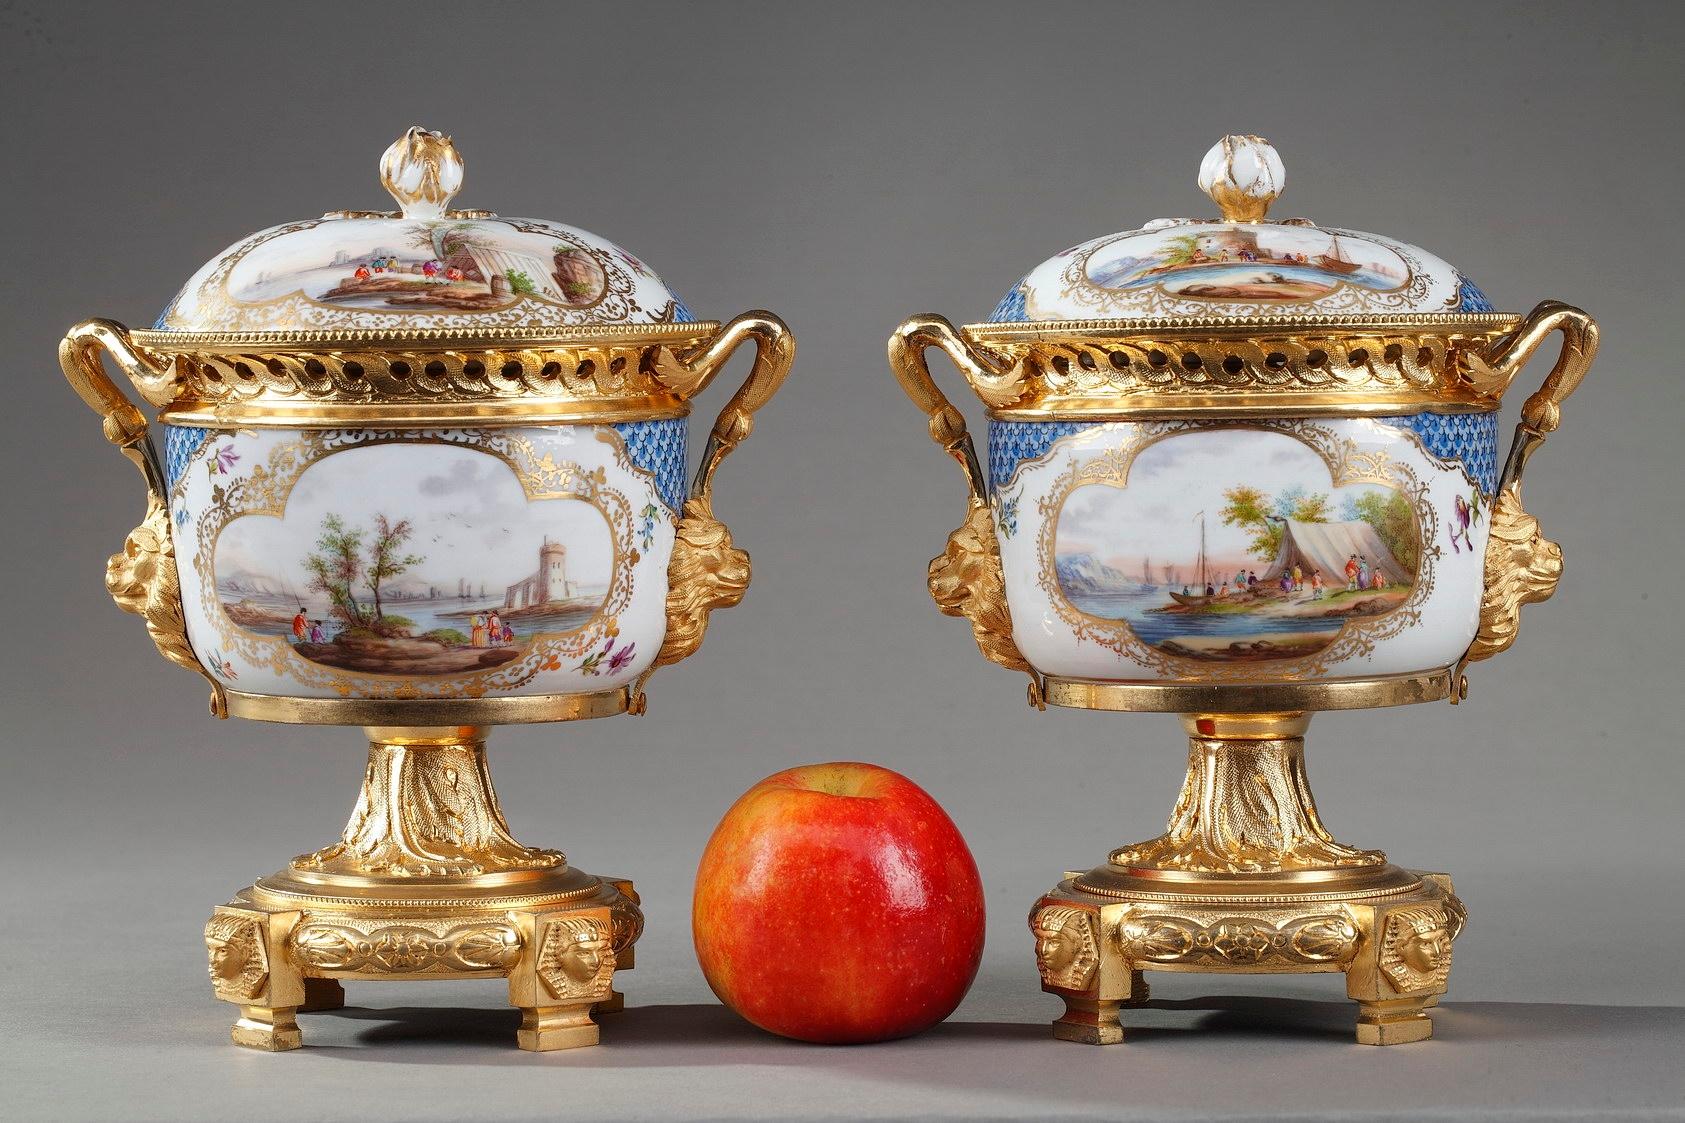 Pair of porcelain centerpiece vases for aromatic potpourri. Each vase displays port scenes in medallions highlighted with gold on white and blue background. The paunch and lid are decorated with delicately worked scales and flowers. Gilt bronze